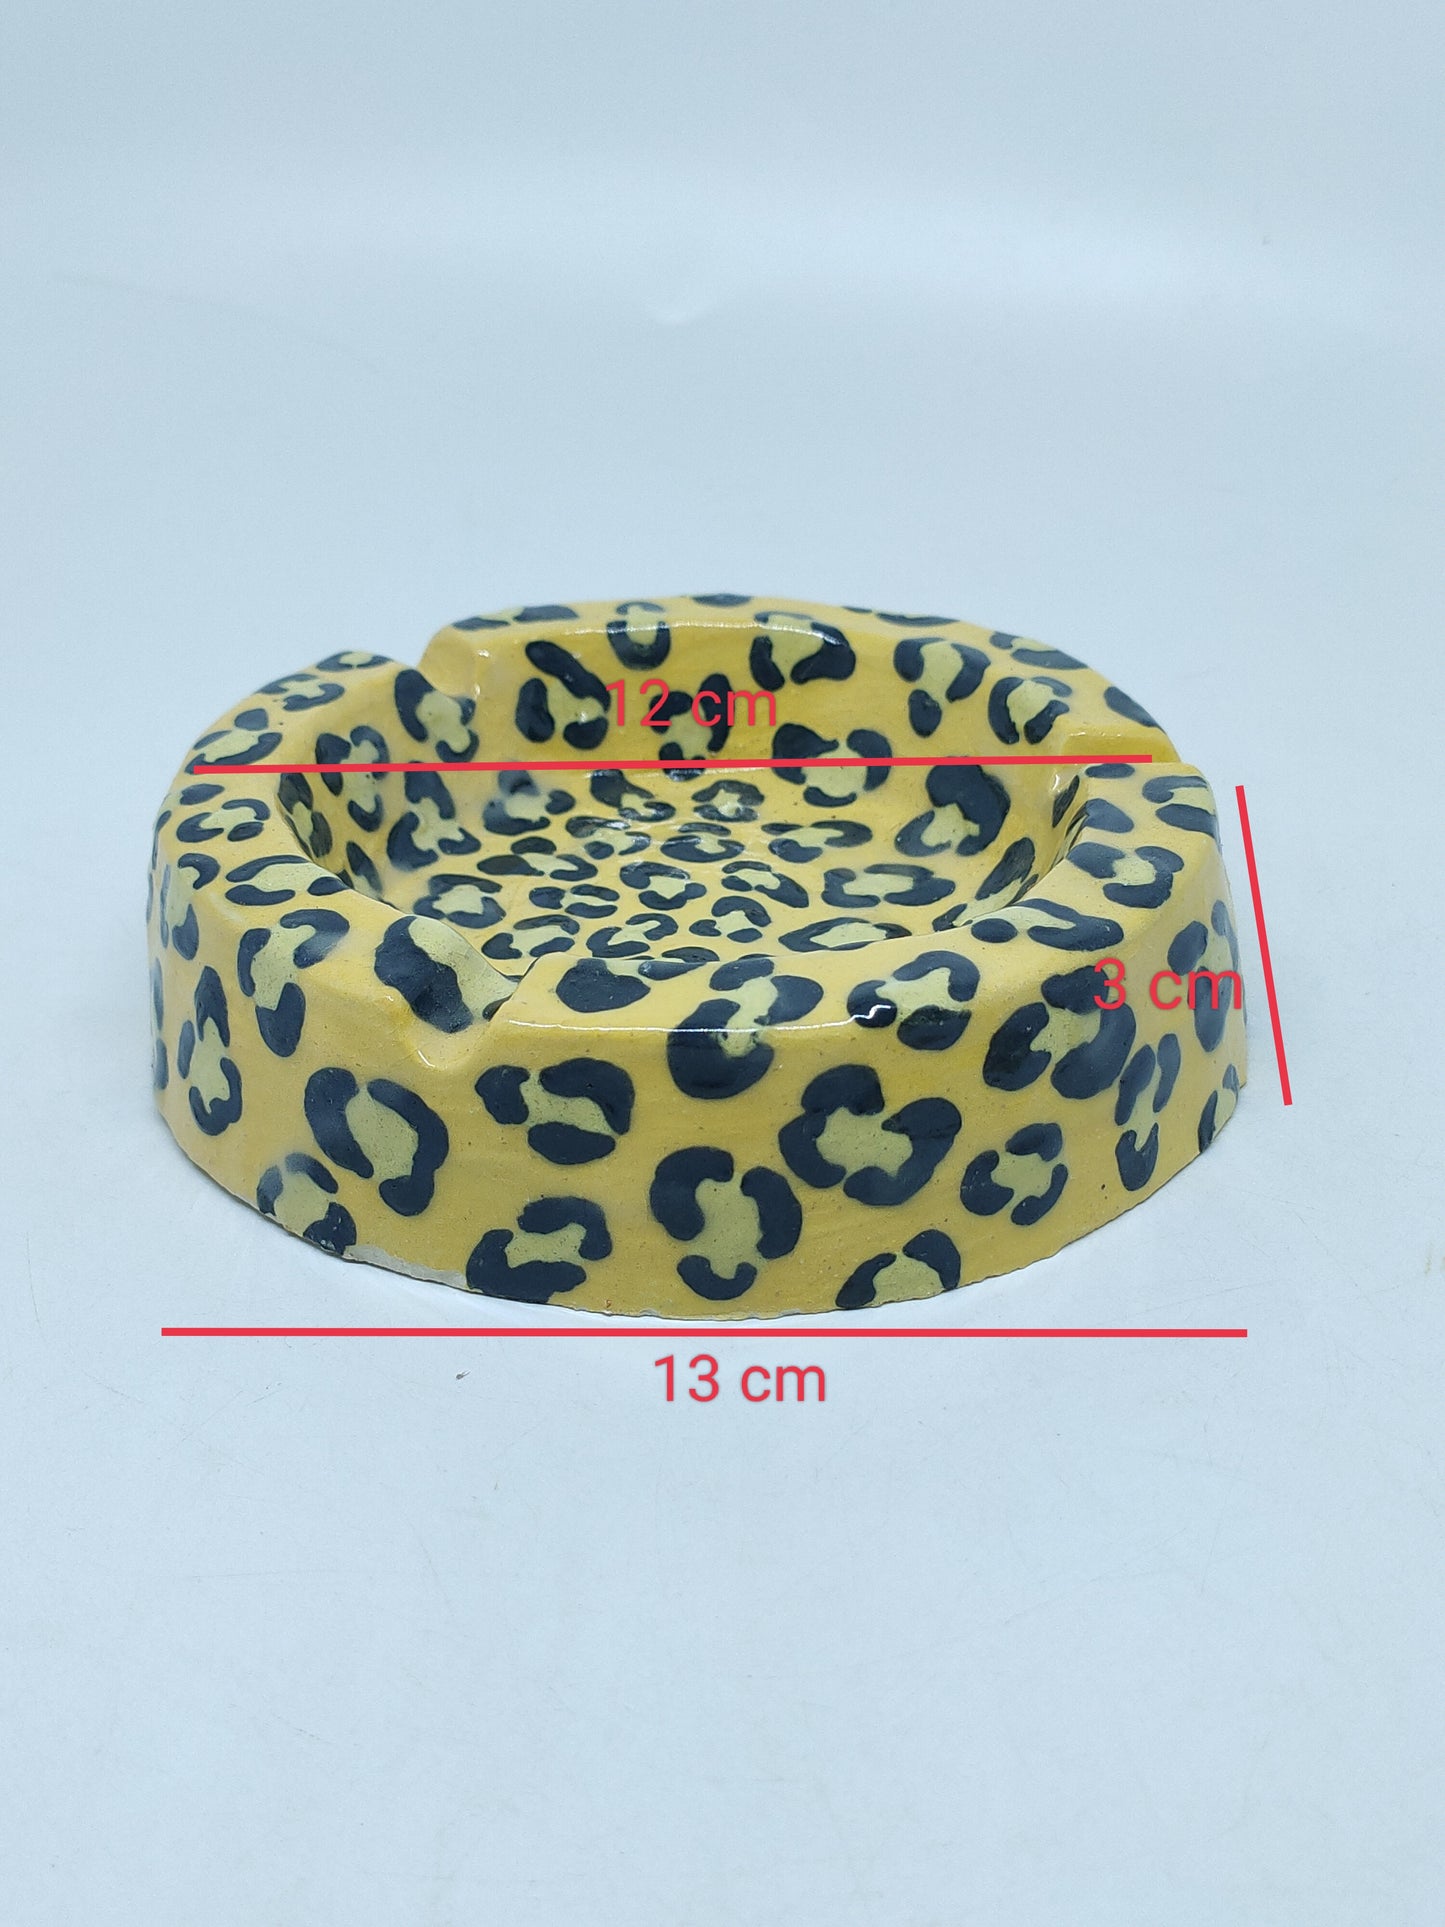 Leopard Ashtray By Bonggal Hutagalung